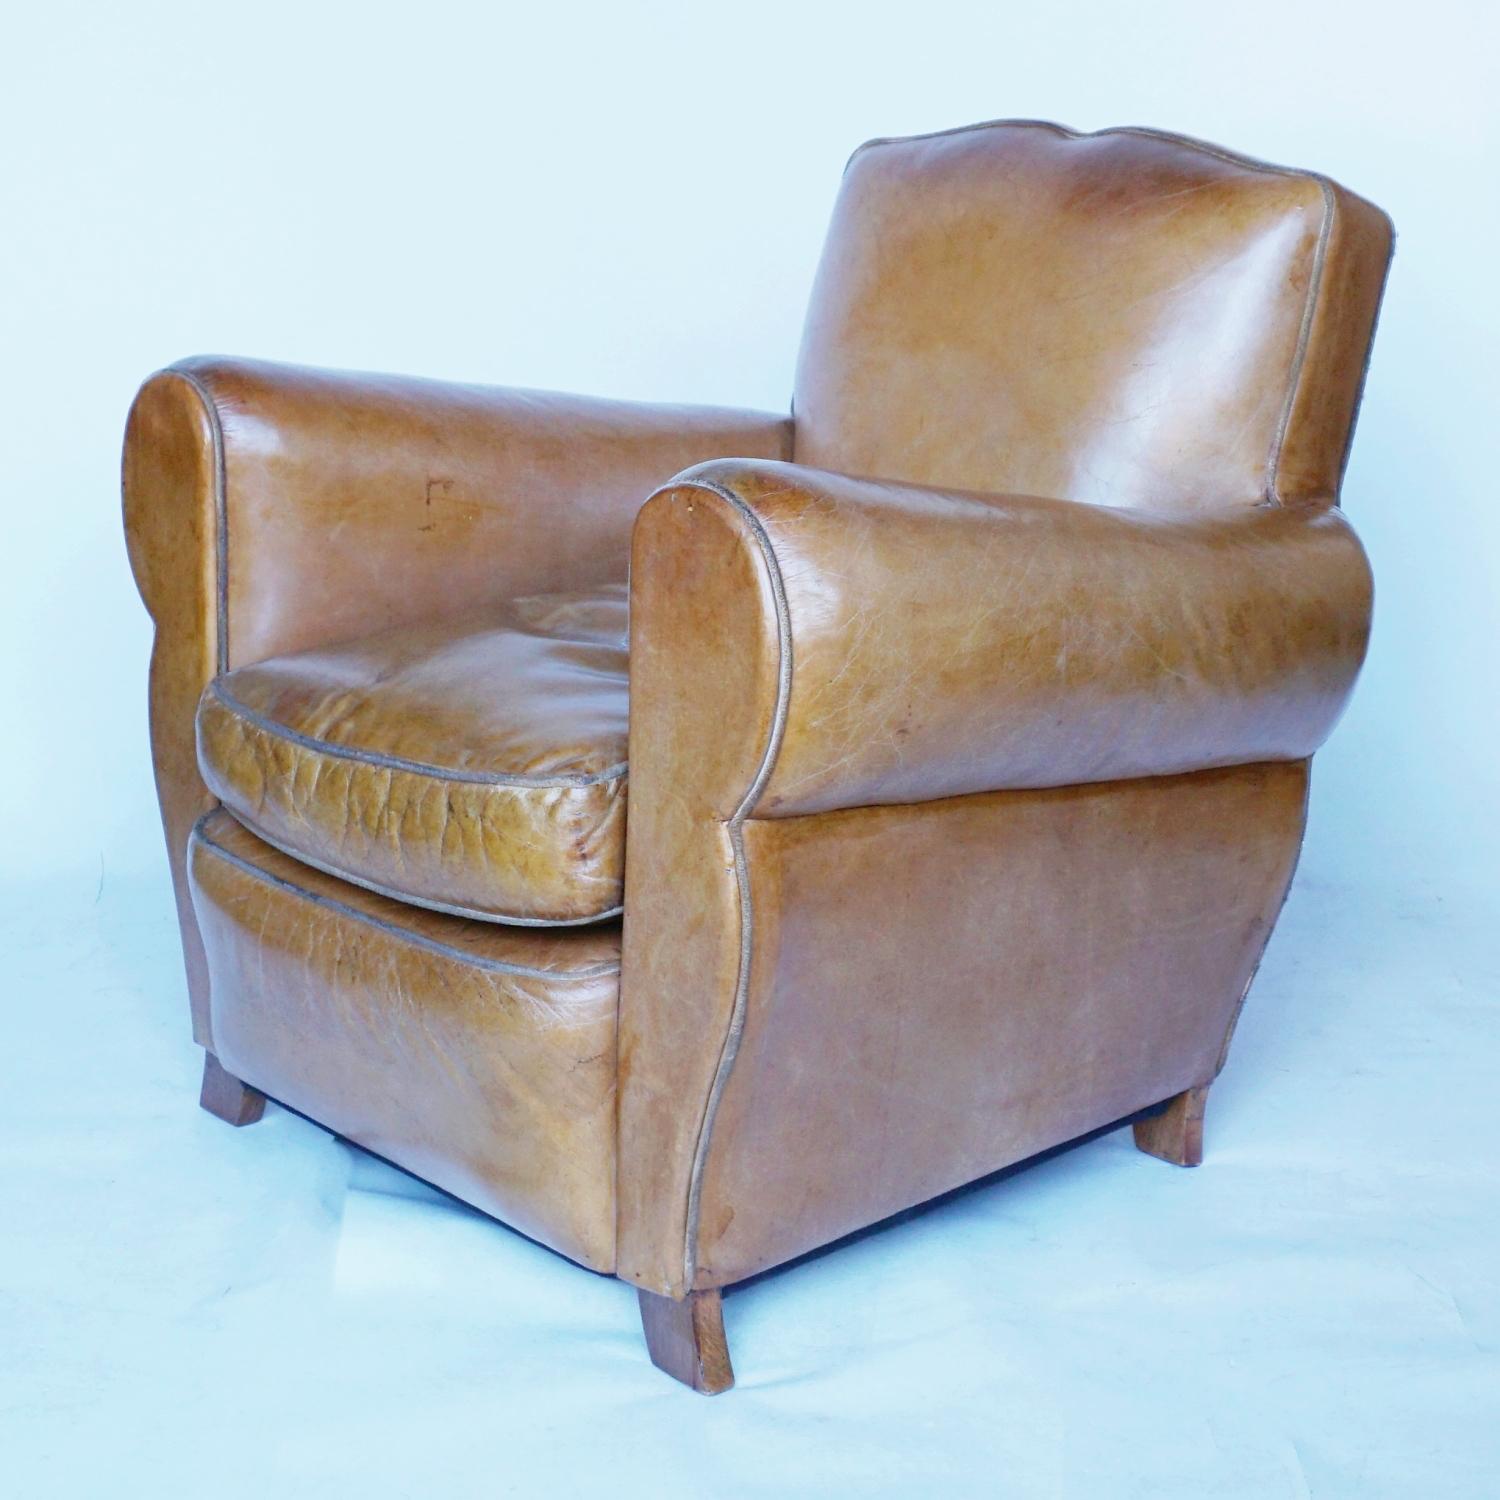 Pair of French Art Deco Club Chairs Upholstered in Brown Leather Circa 1940 1